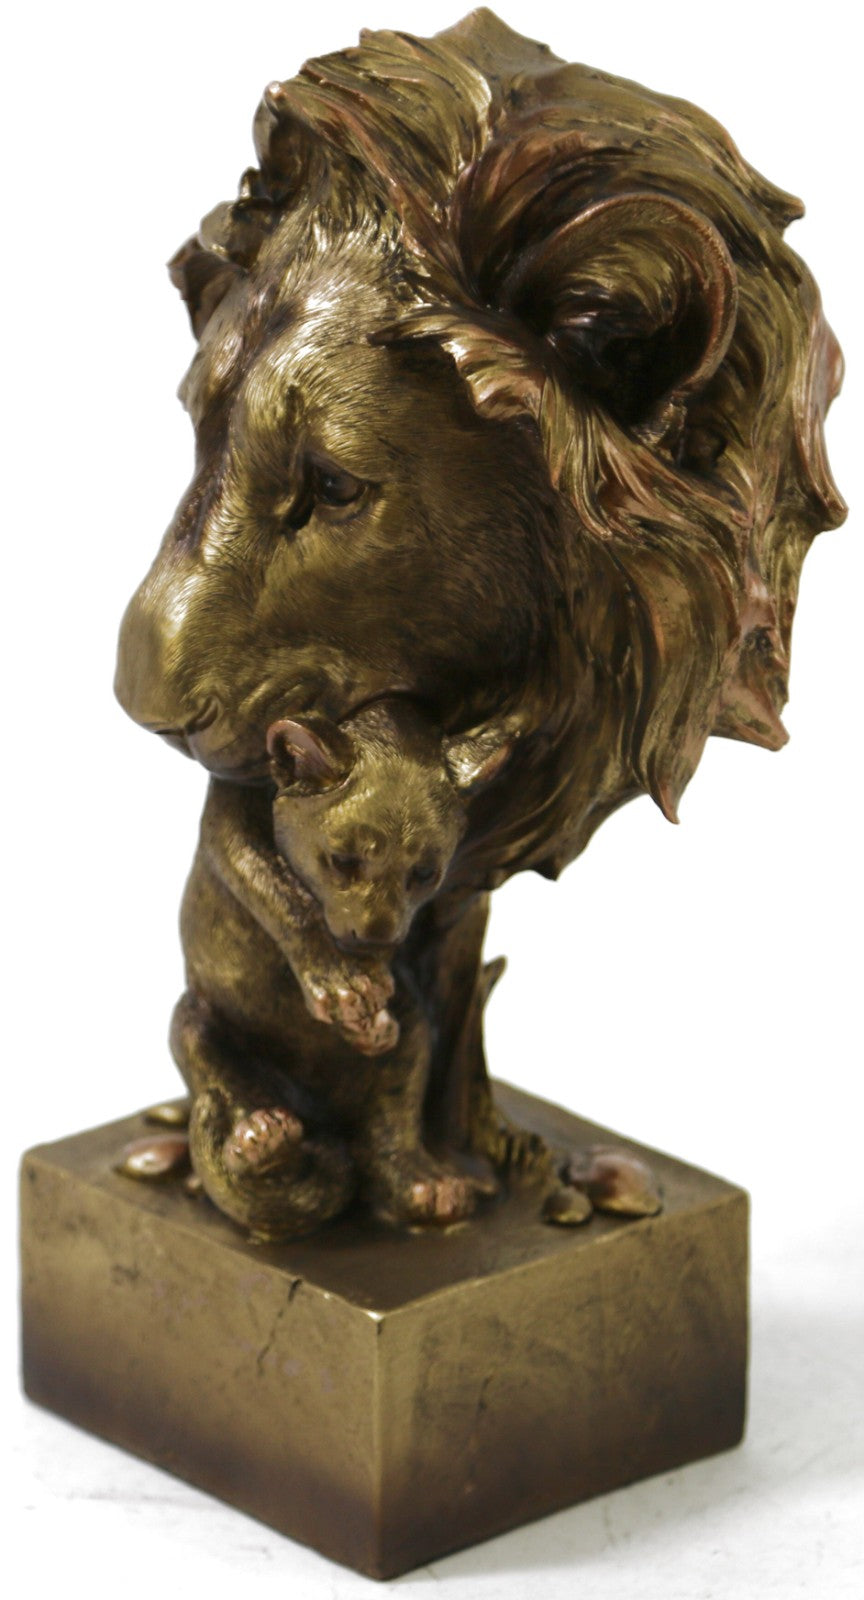 Handcrafted Detailed Lion and Baby Bronze Finish Artwork Sculpture Figurine